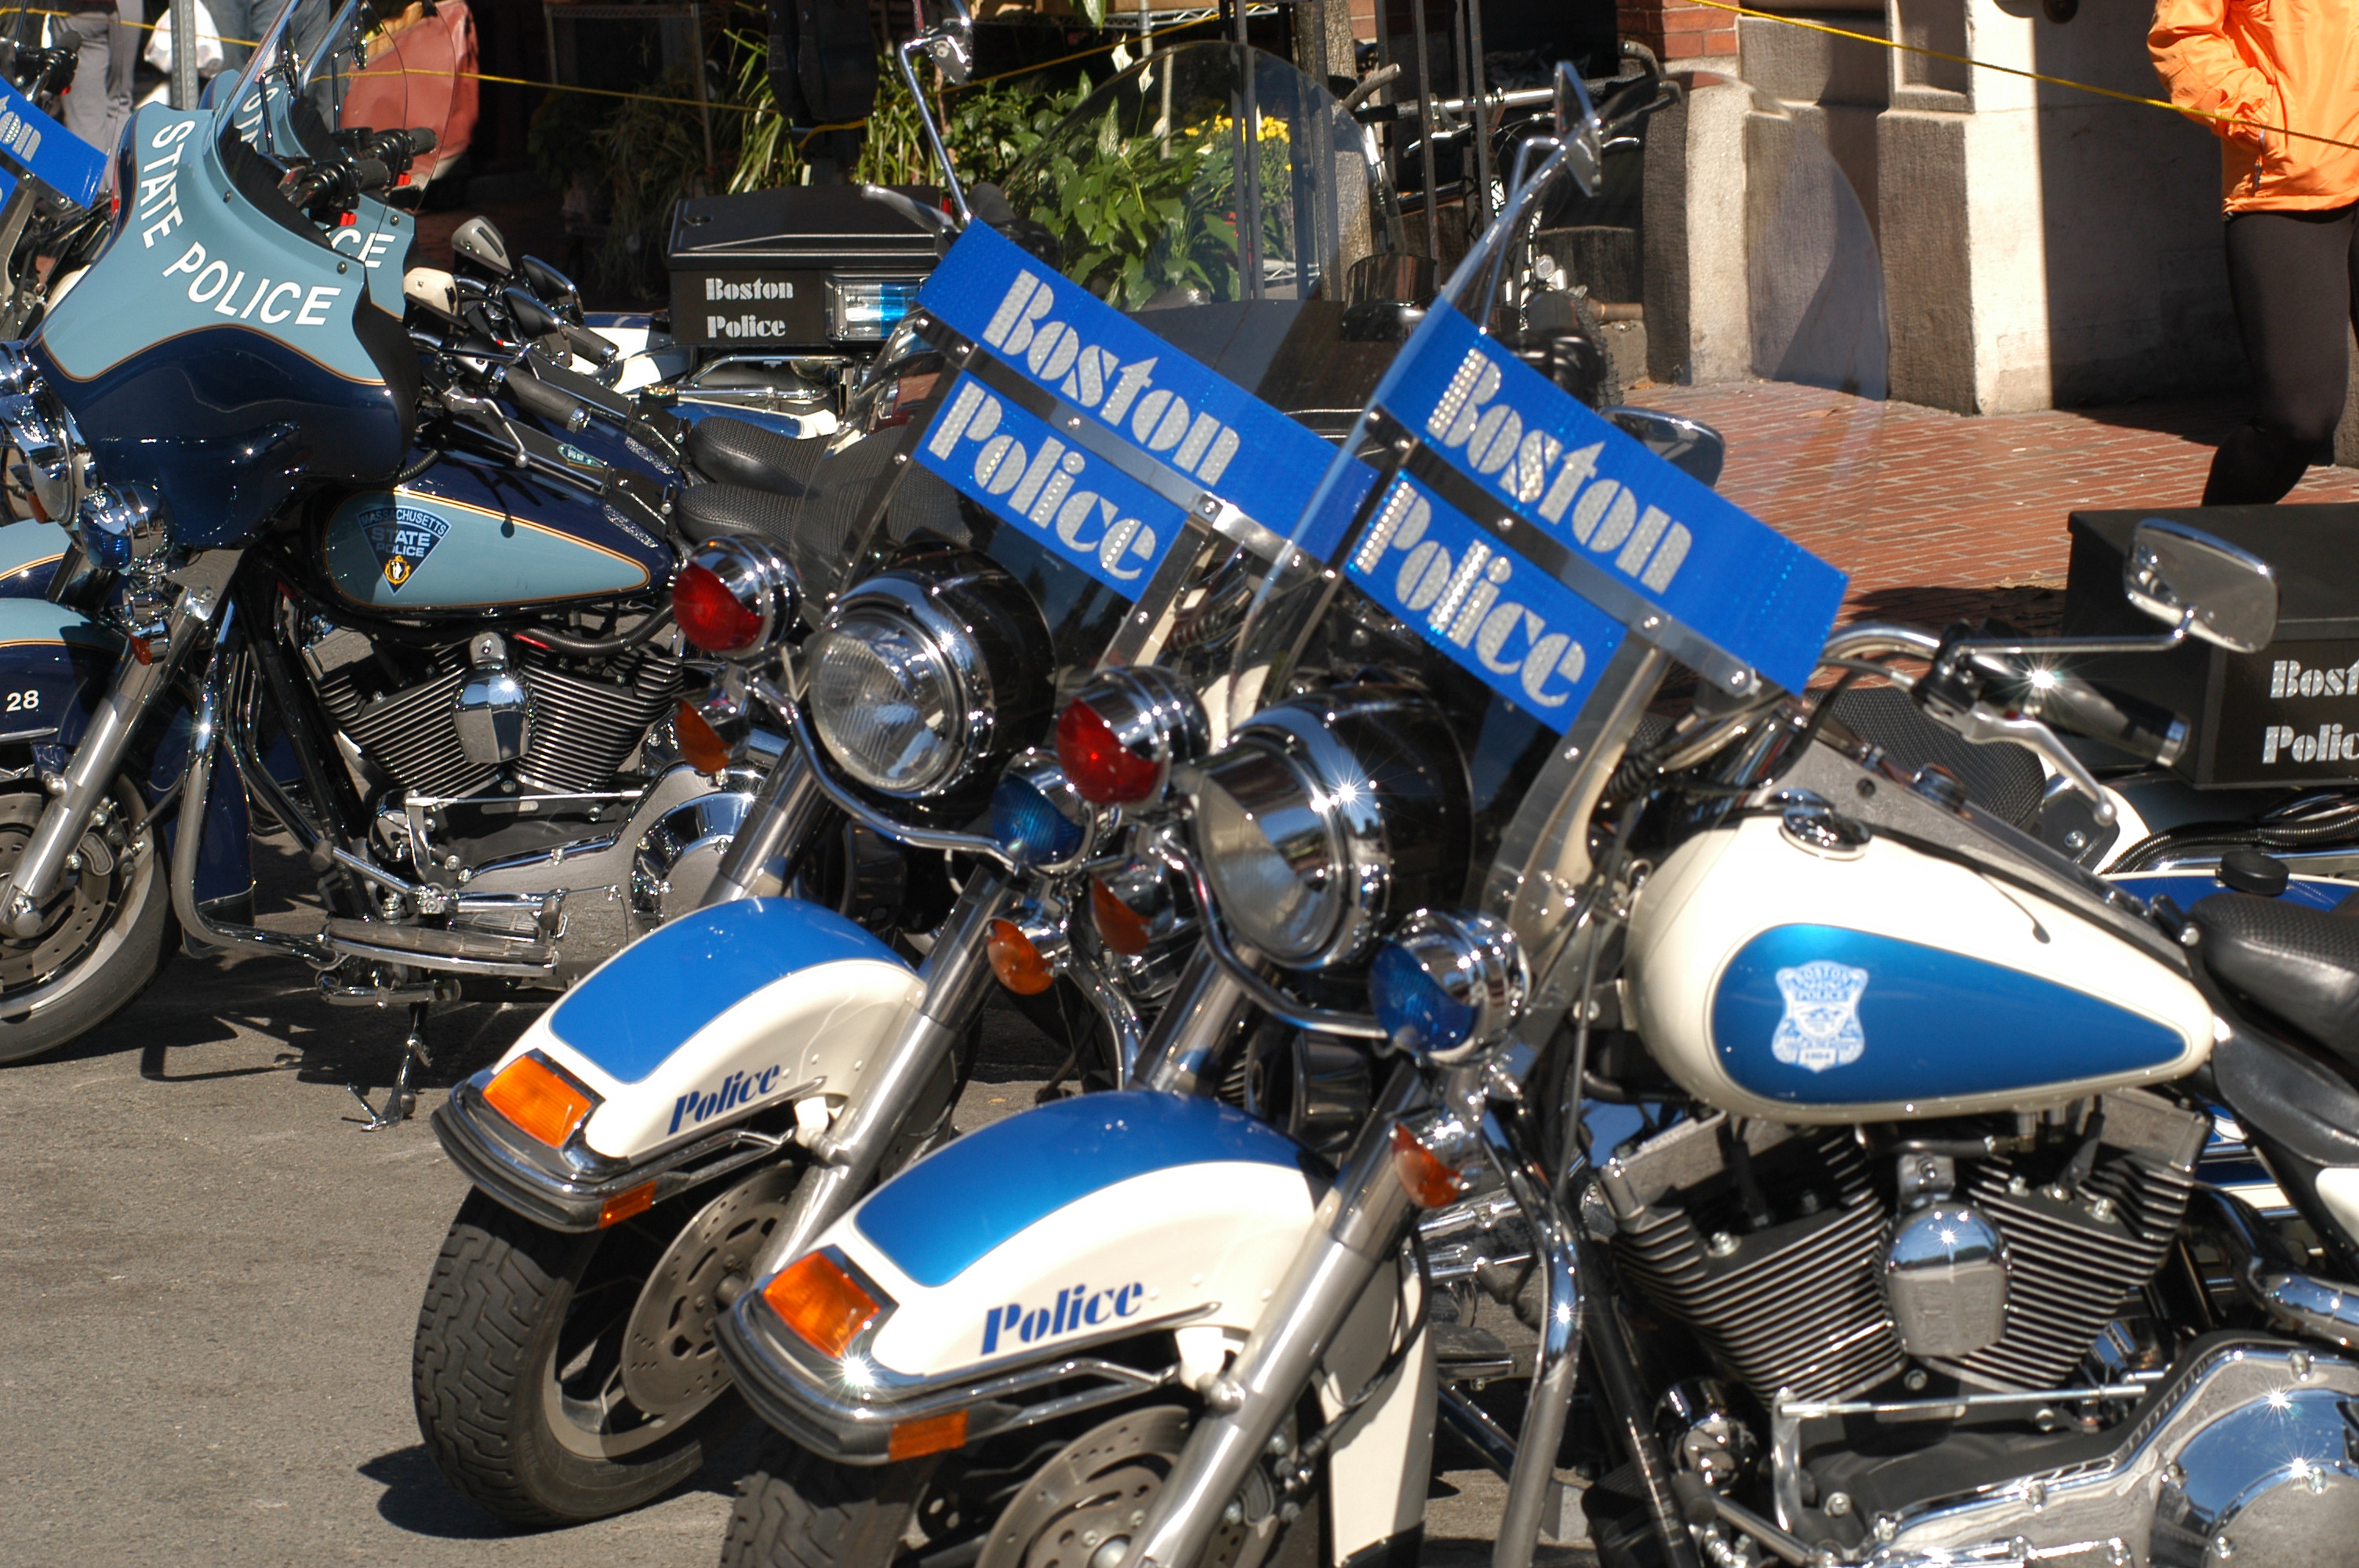 Police Motorcycles - New England Today